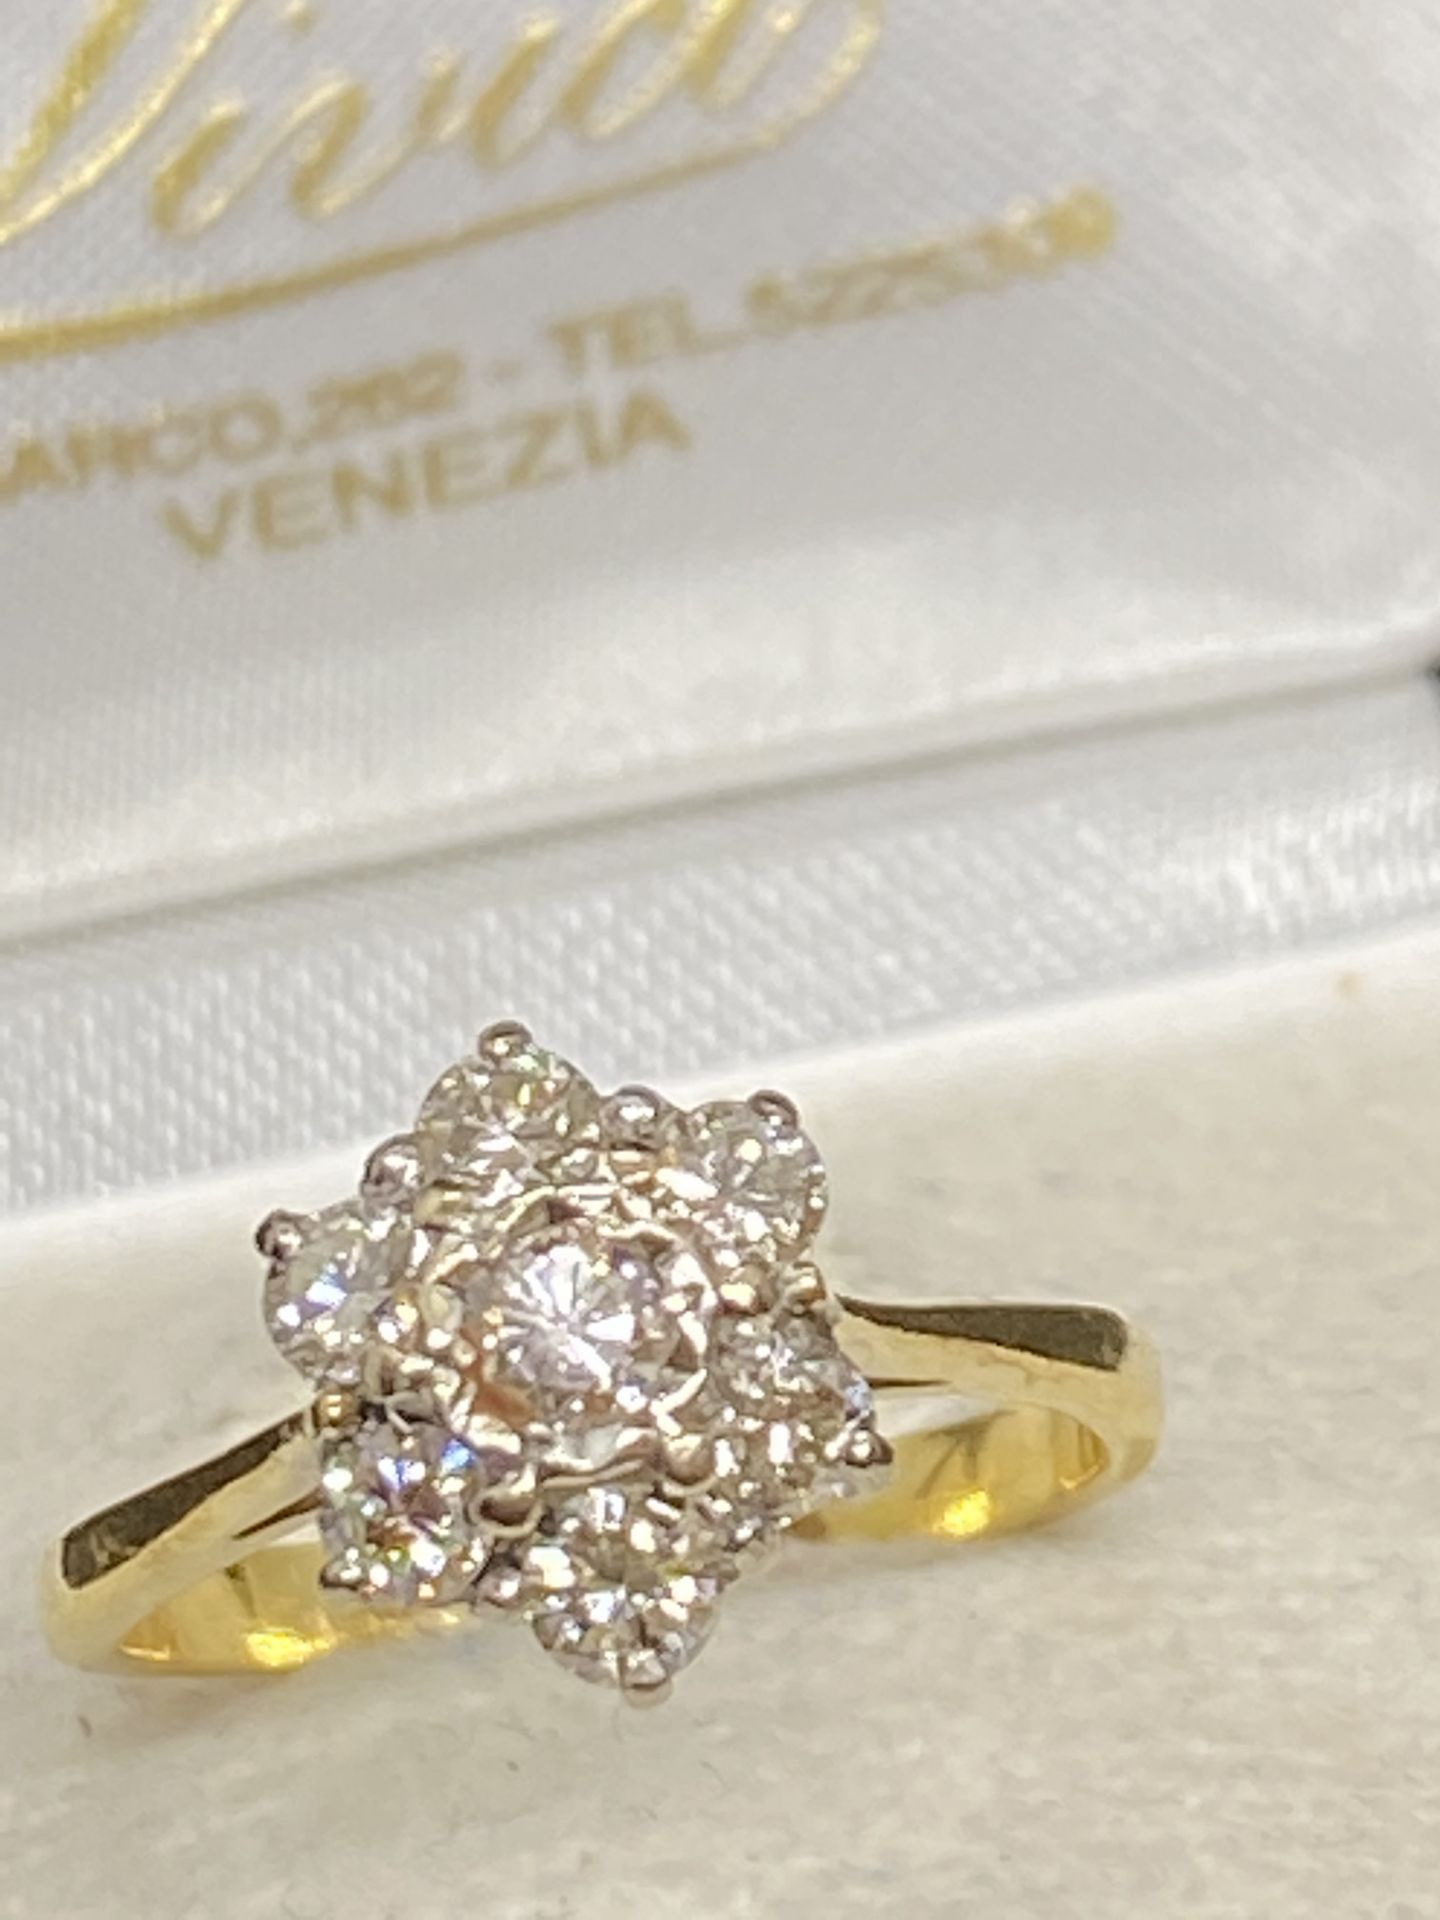 0.65ct I/VSI DIAMOND RING SET IN YELLOW METAL - TESTED AS 18ct GOLD - 3.5 GRAMS - Image 3 of 4